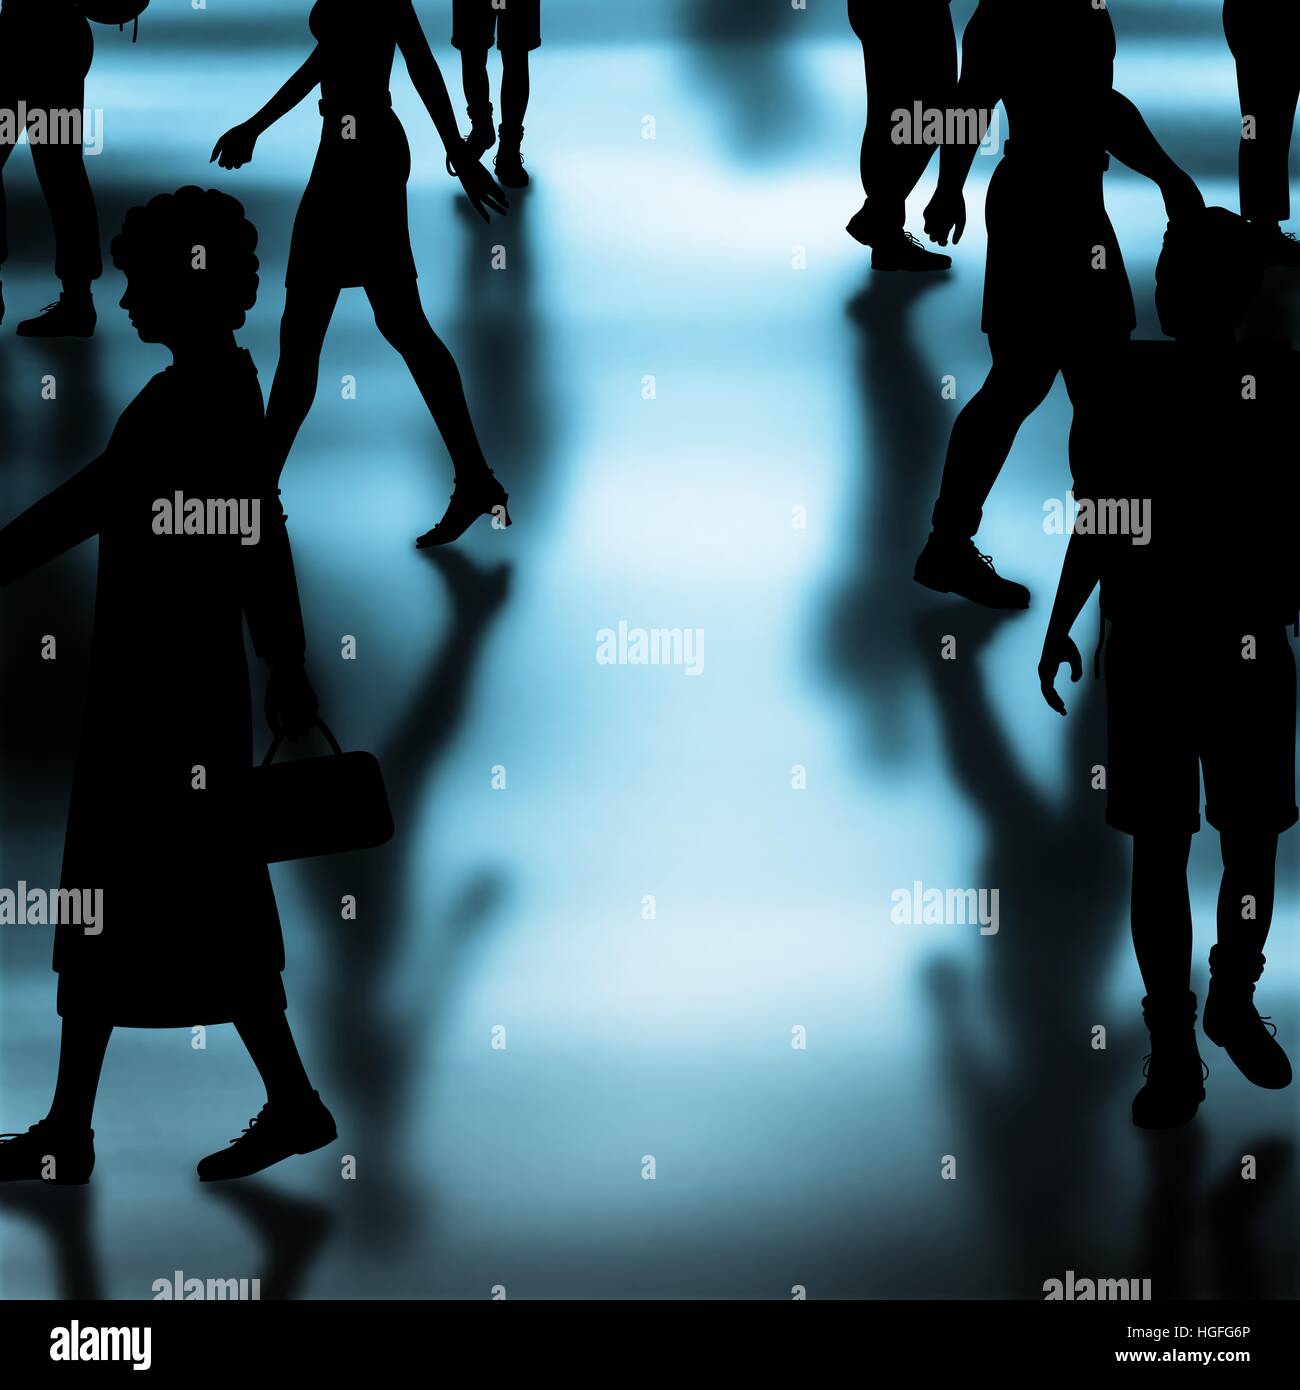 Editable vector silhouettes of people walking in a crowded hall with shadows made using a gradient mesh Stock Vector